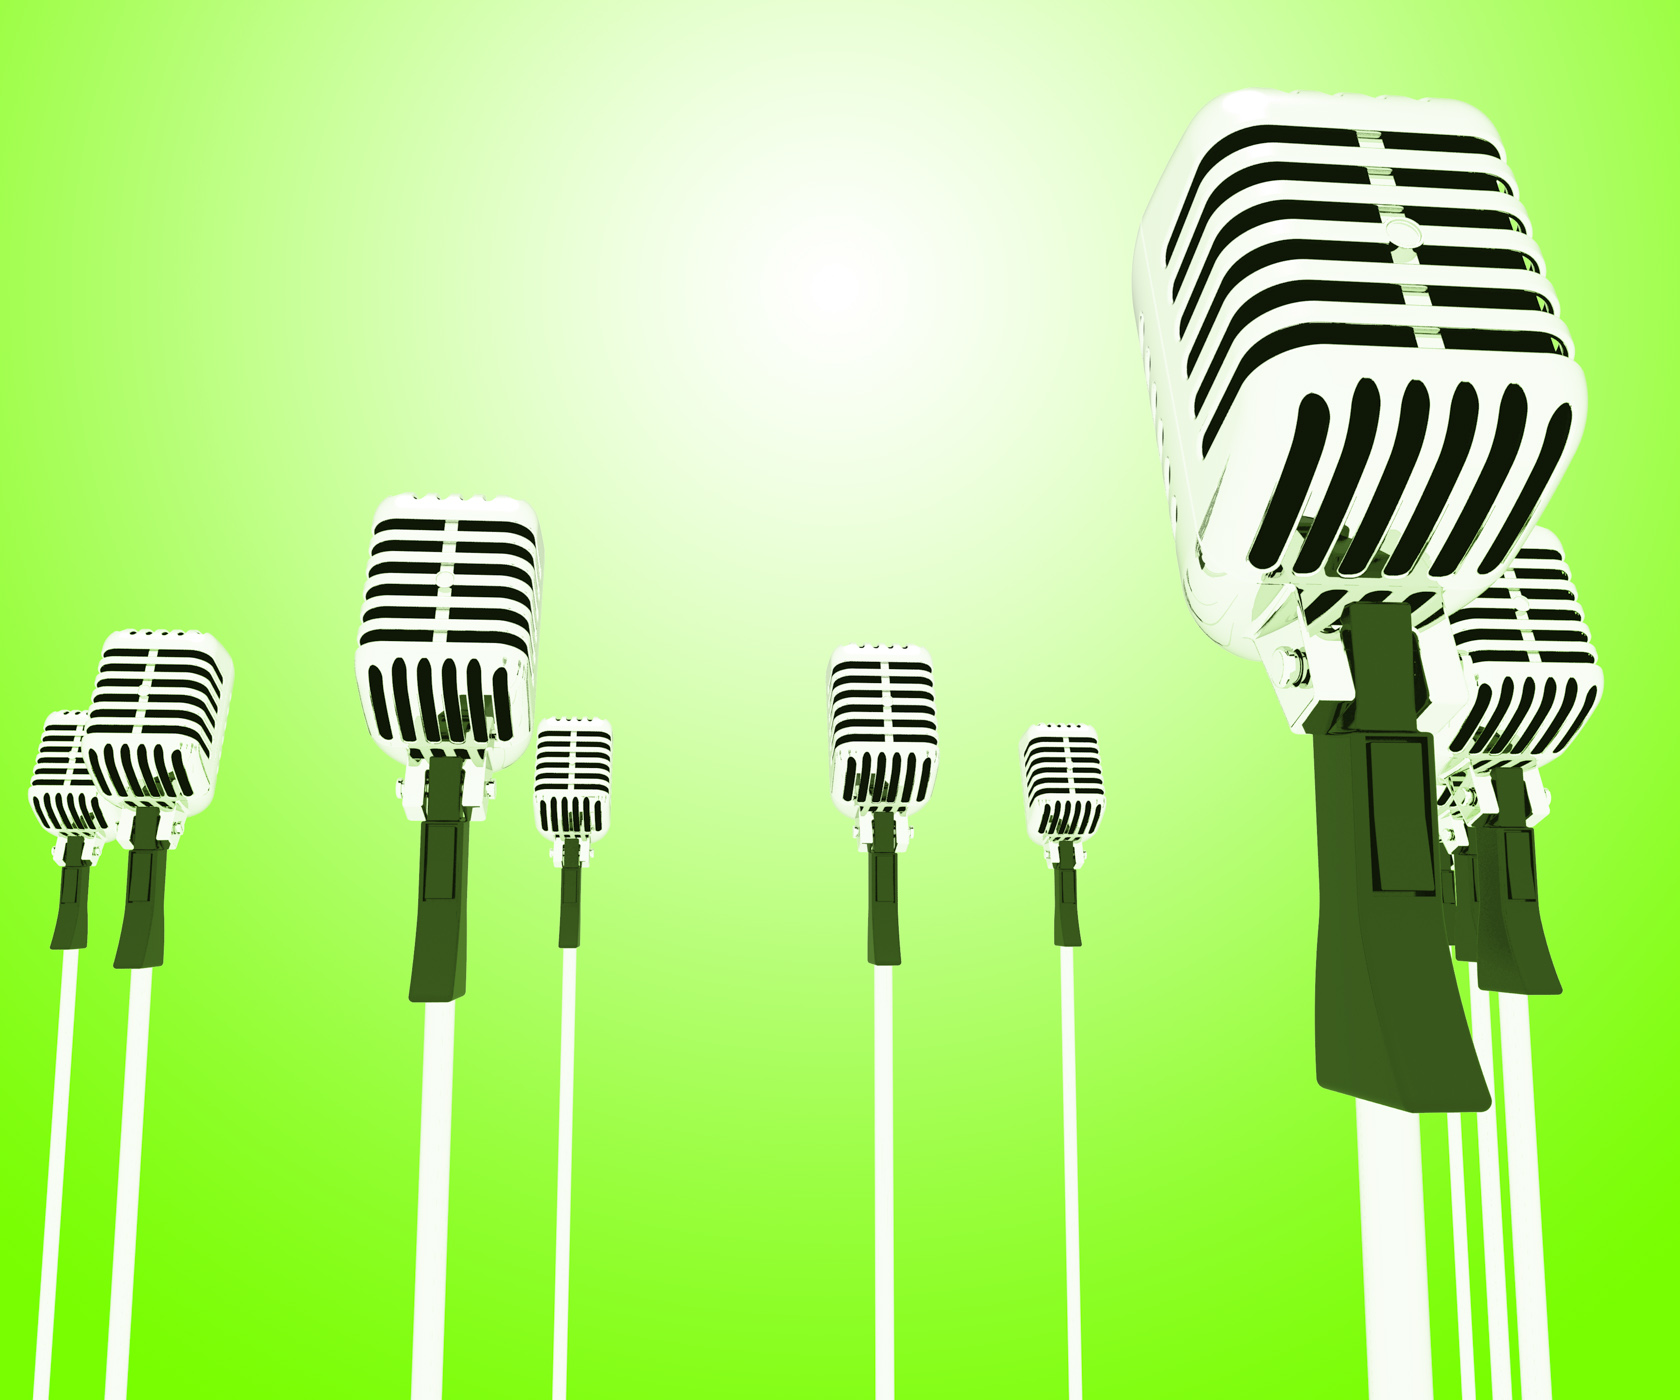 Microphones mics shows musical group or concert photo